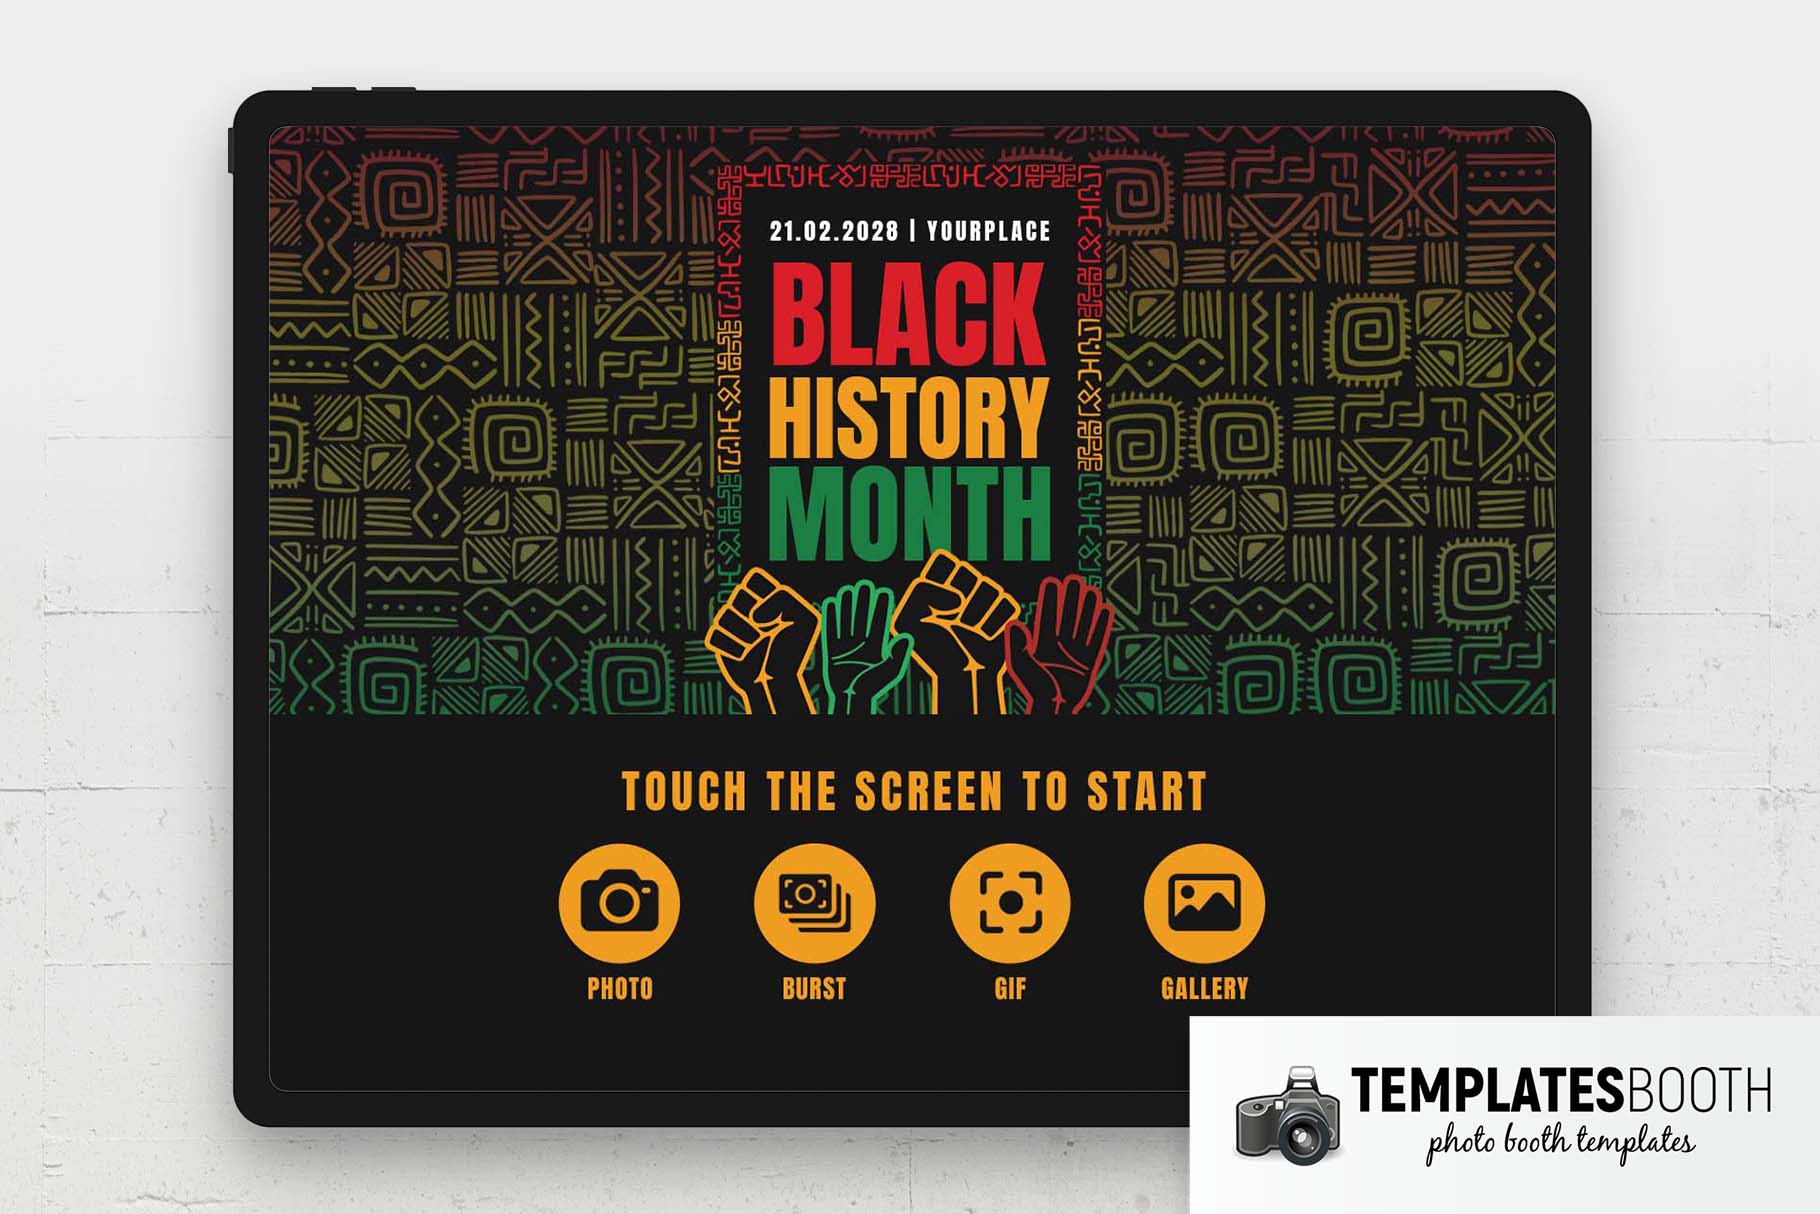 Black History Month Photo Booth Welcome Screen